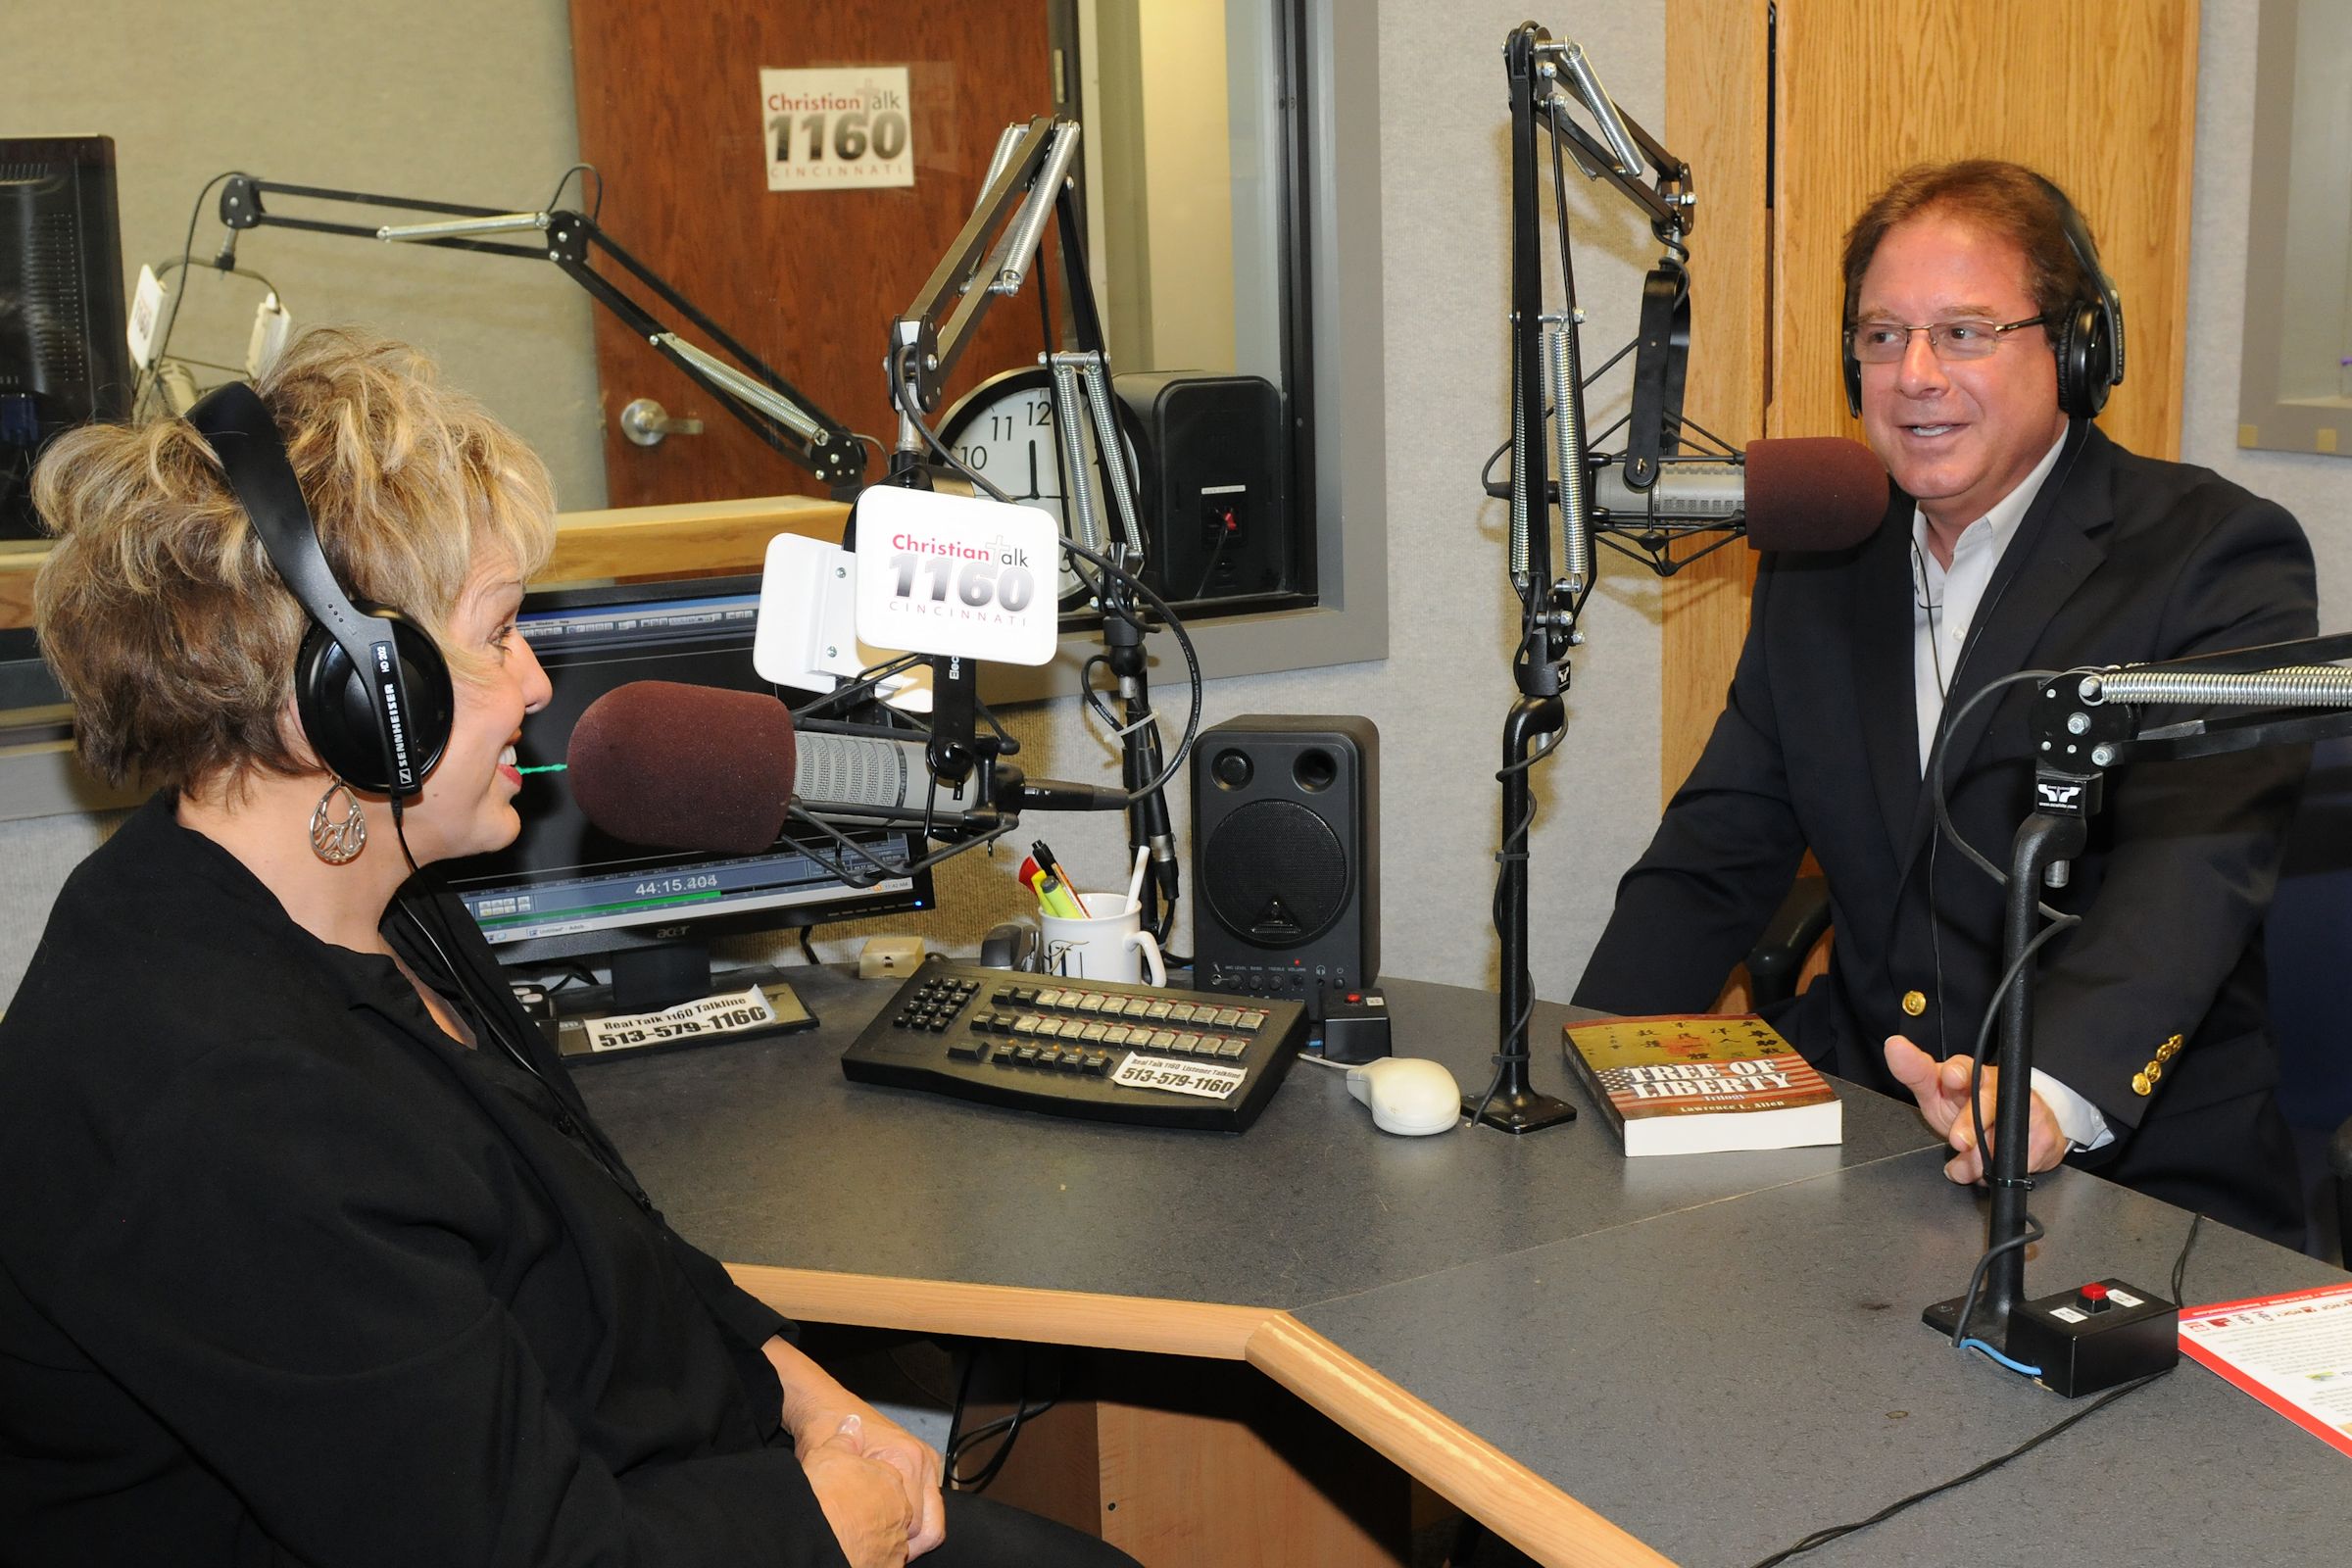 Lawrence Allen was interviewed on the Kathryn Raaker Let's Just Talk Radio Program to receive the award in Cincinnati, OH.